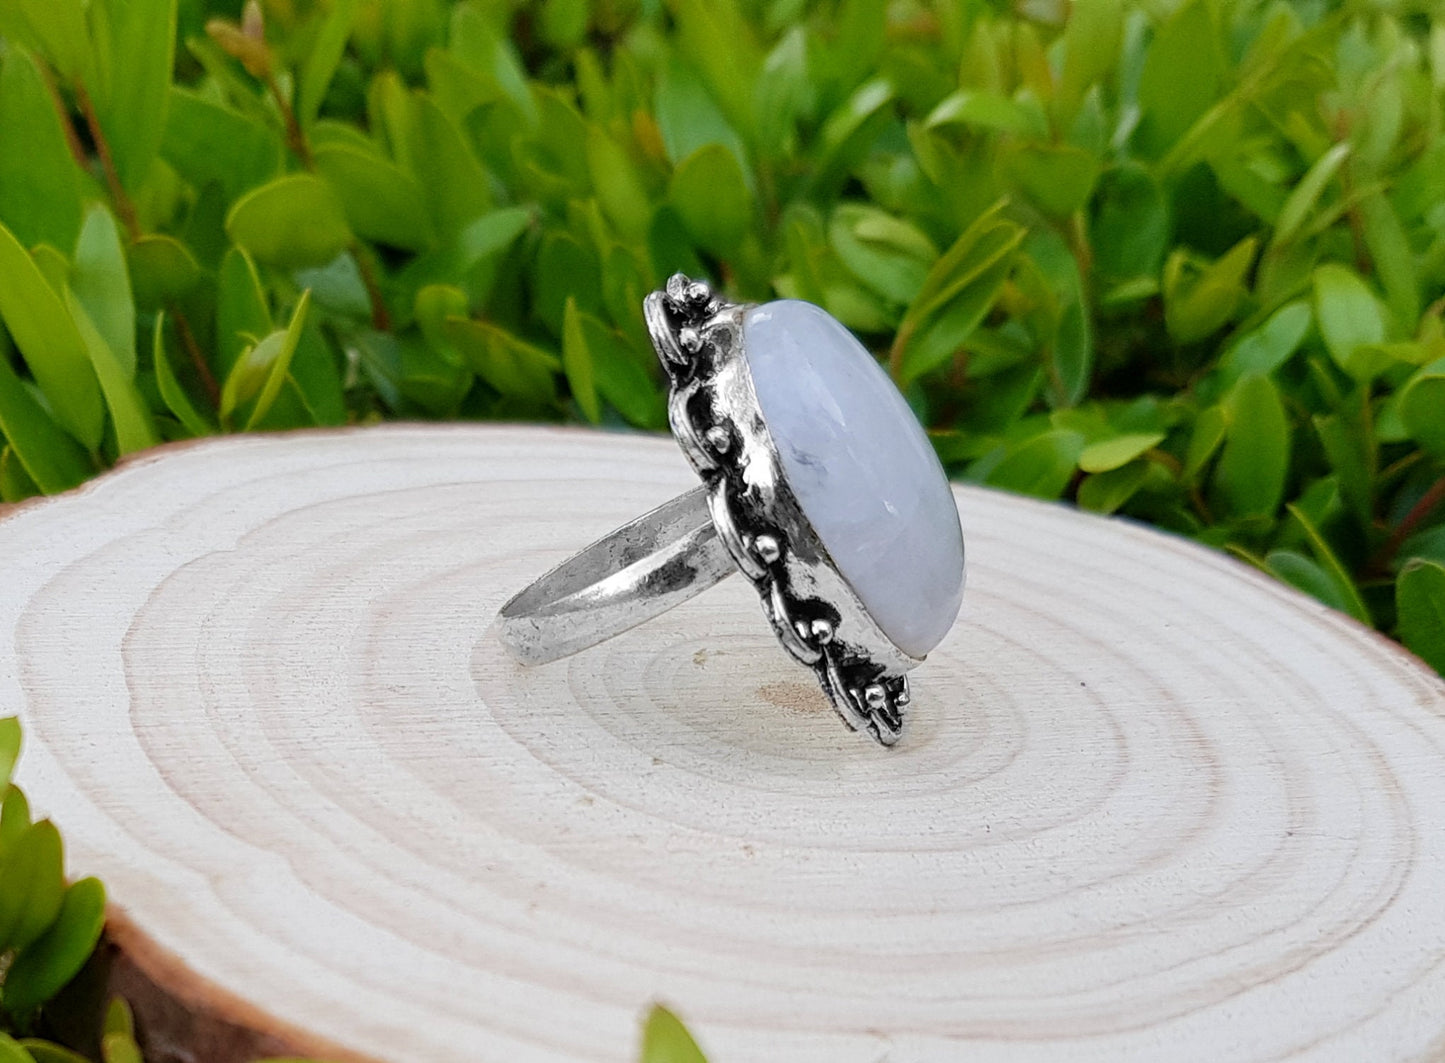 Rainbow Moonstone Statement Ring Sterling Silver Boho Rings Size US 8 1/2 Unique Jewelry One Of A Kind Gift GypsyJewelry